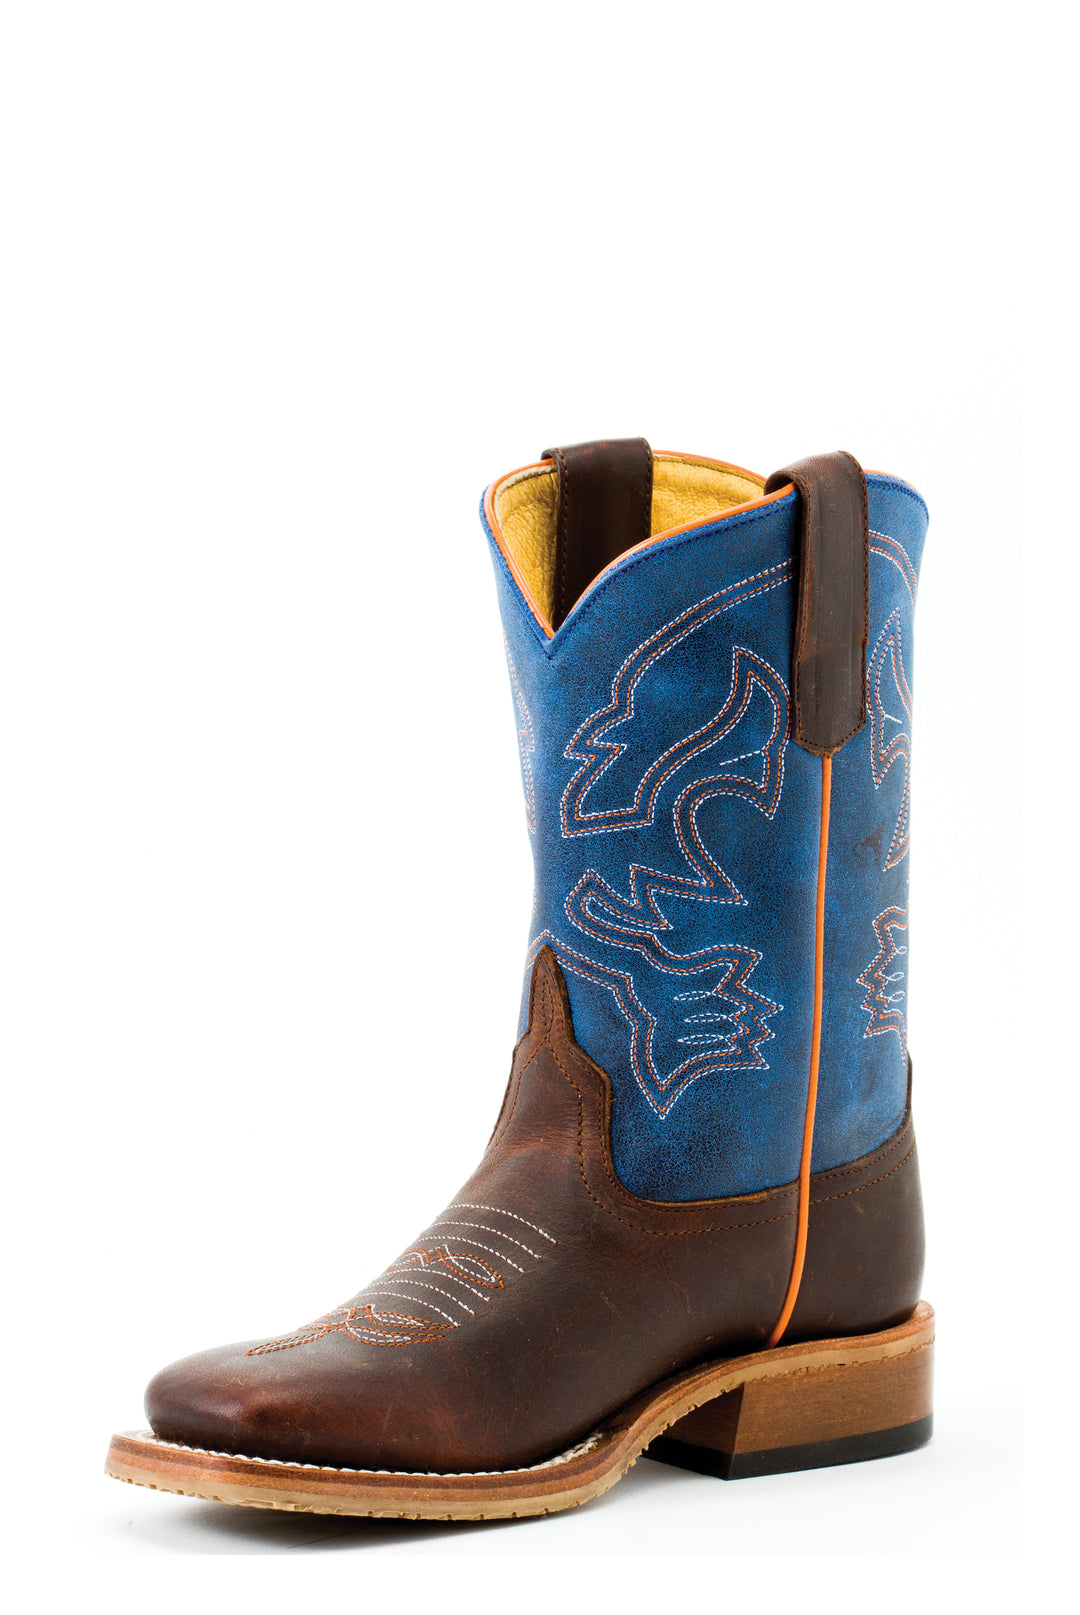 Anderson Bean | Toast Bison Kids Boot